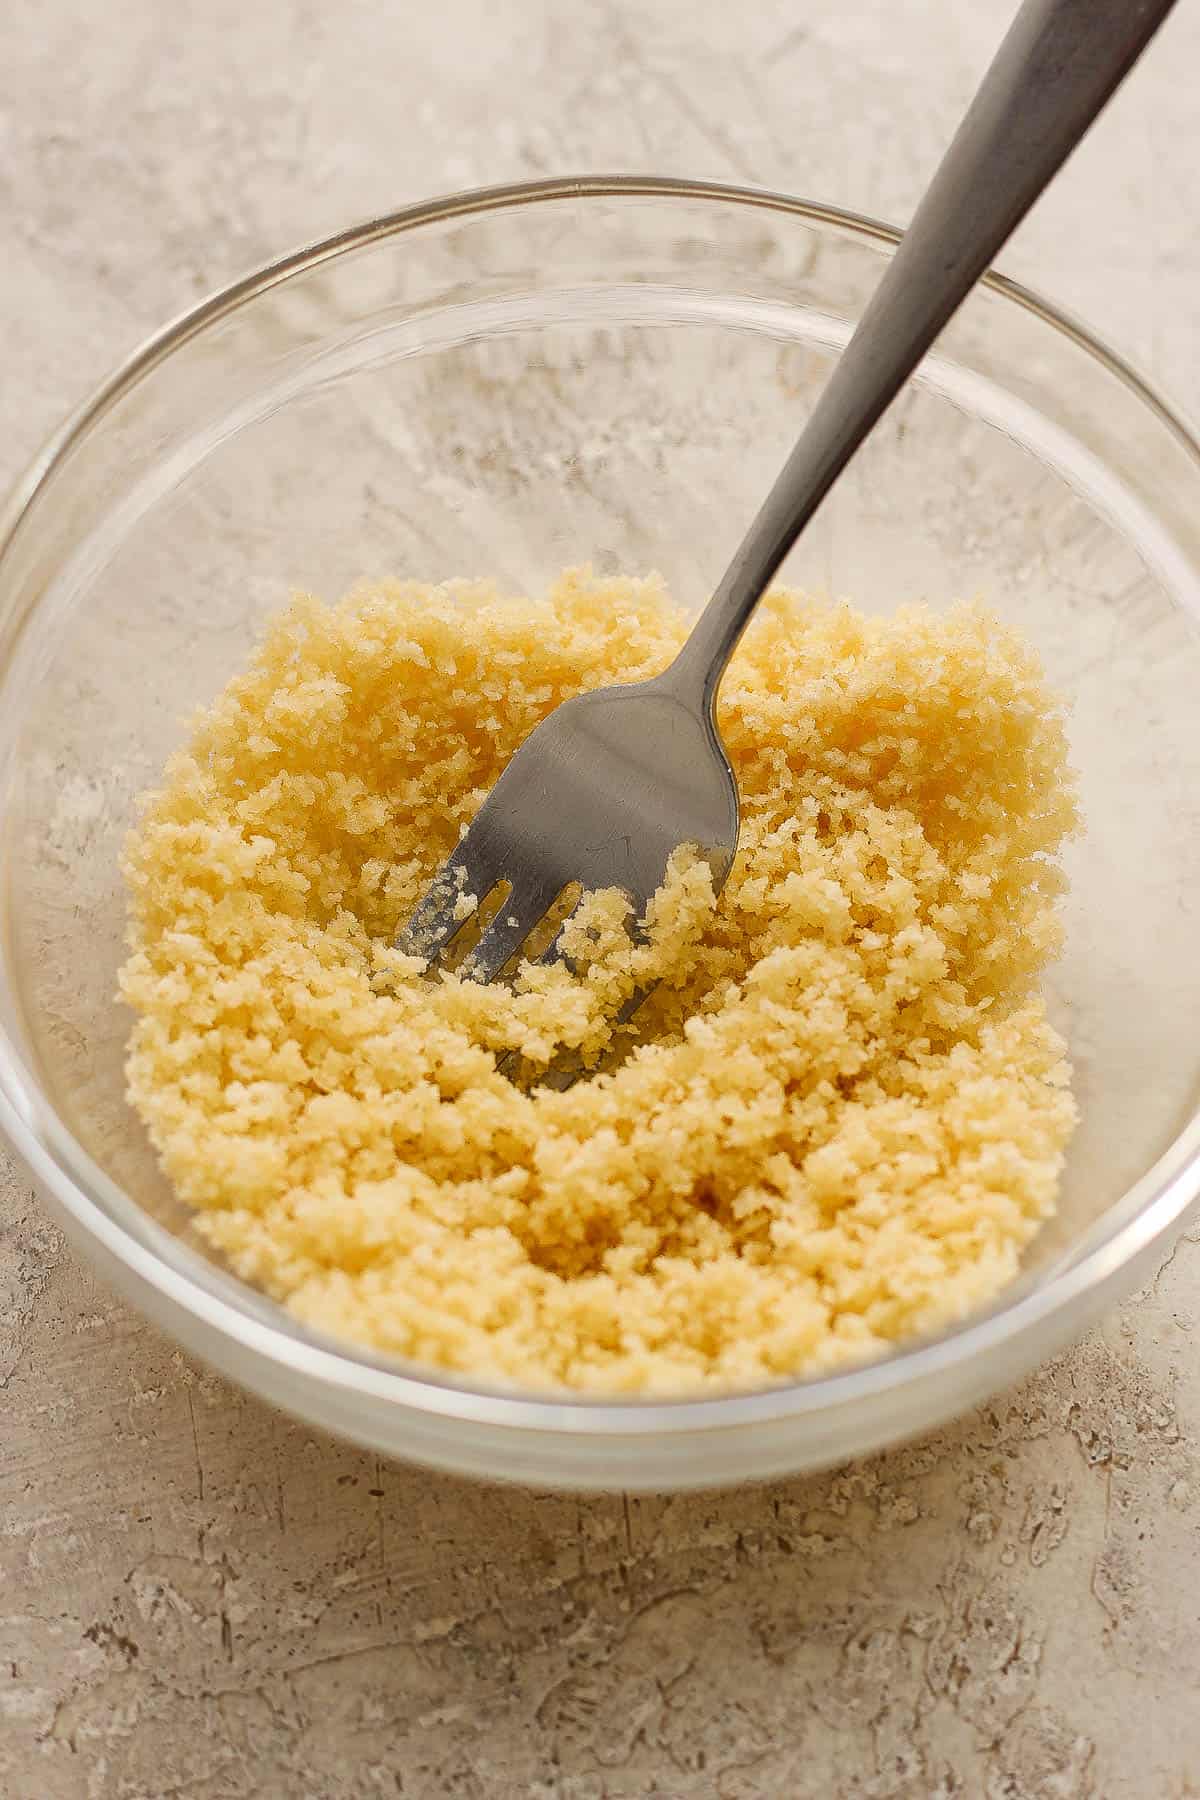 Panko breadcrumbs combined with melted butter in a small bowl.